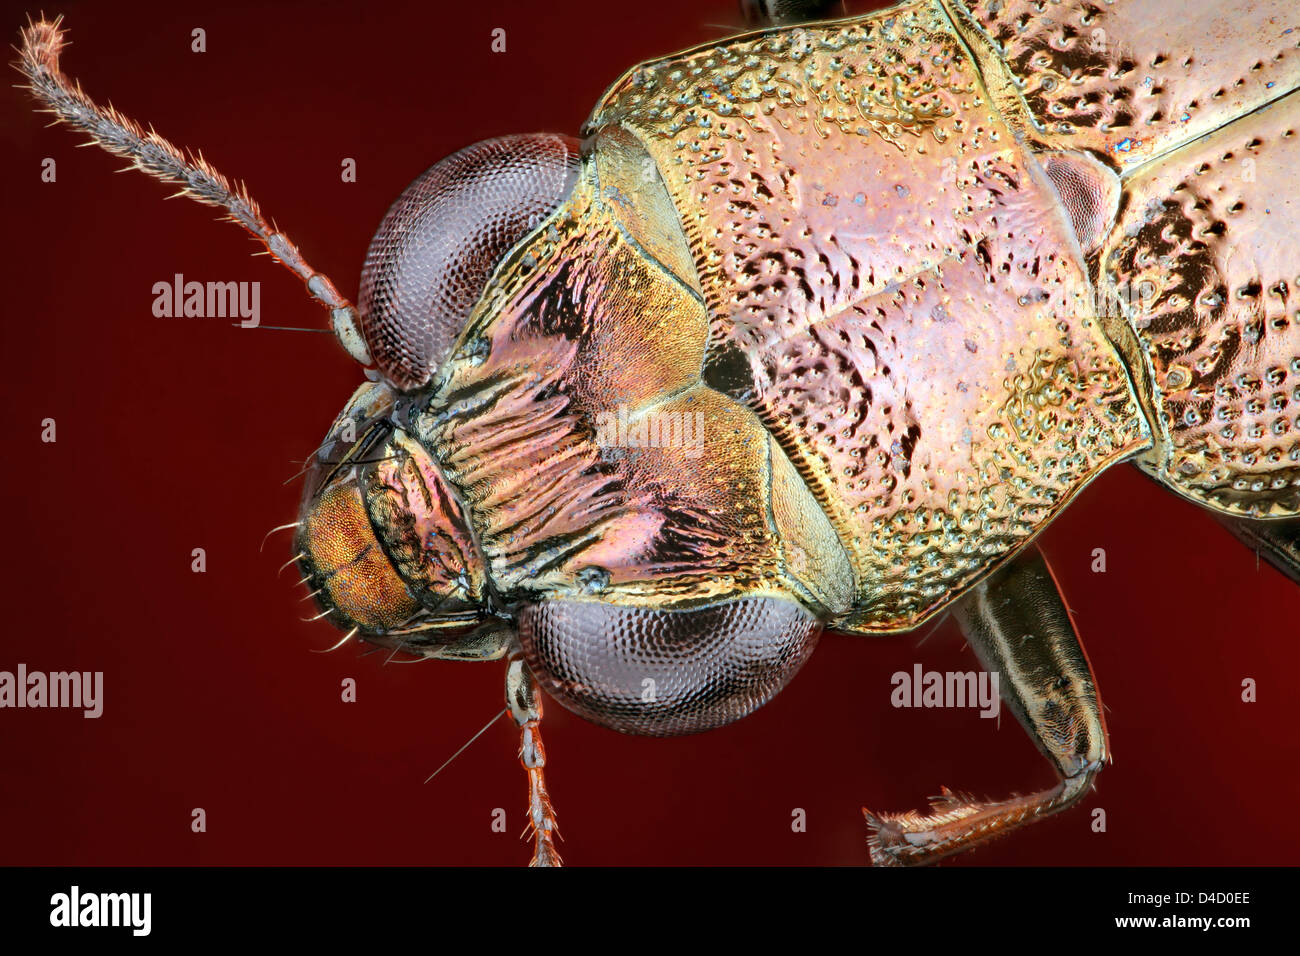 Head of a ground beetle Notiophilus, extreme close-up Stock Photo